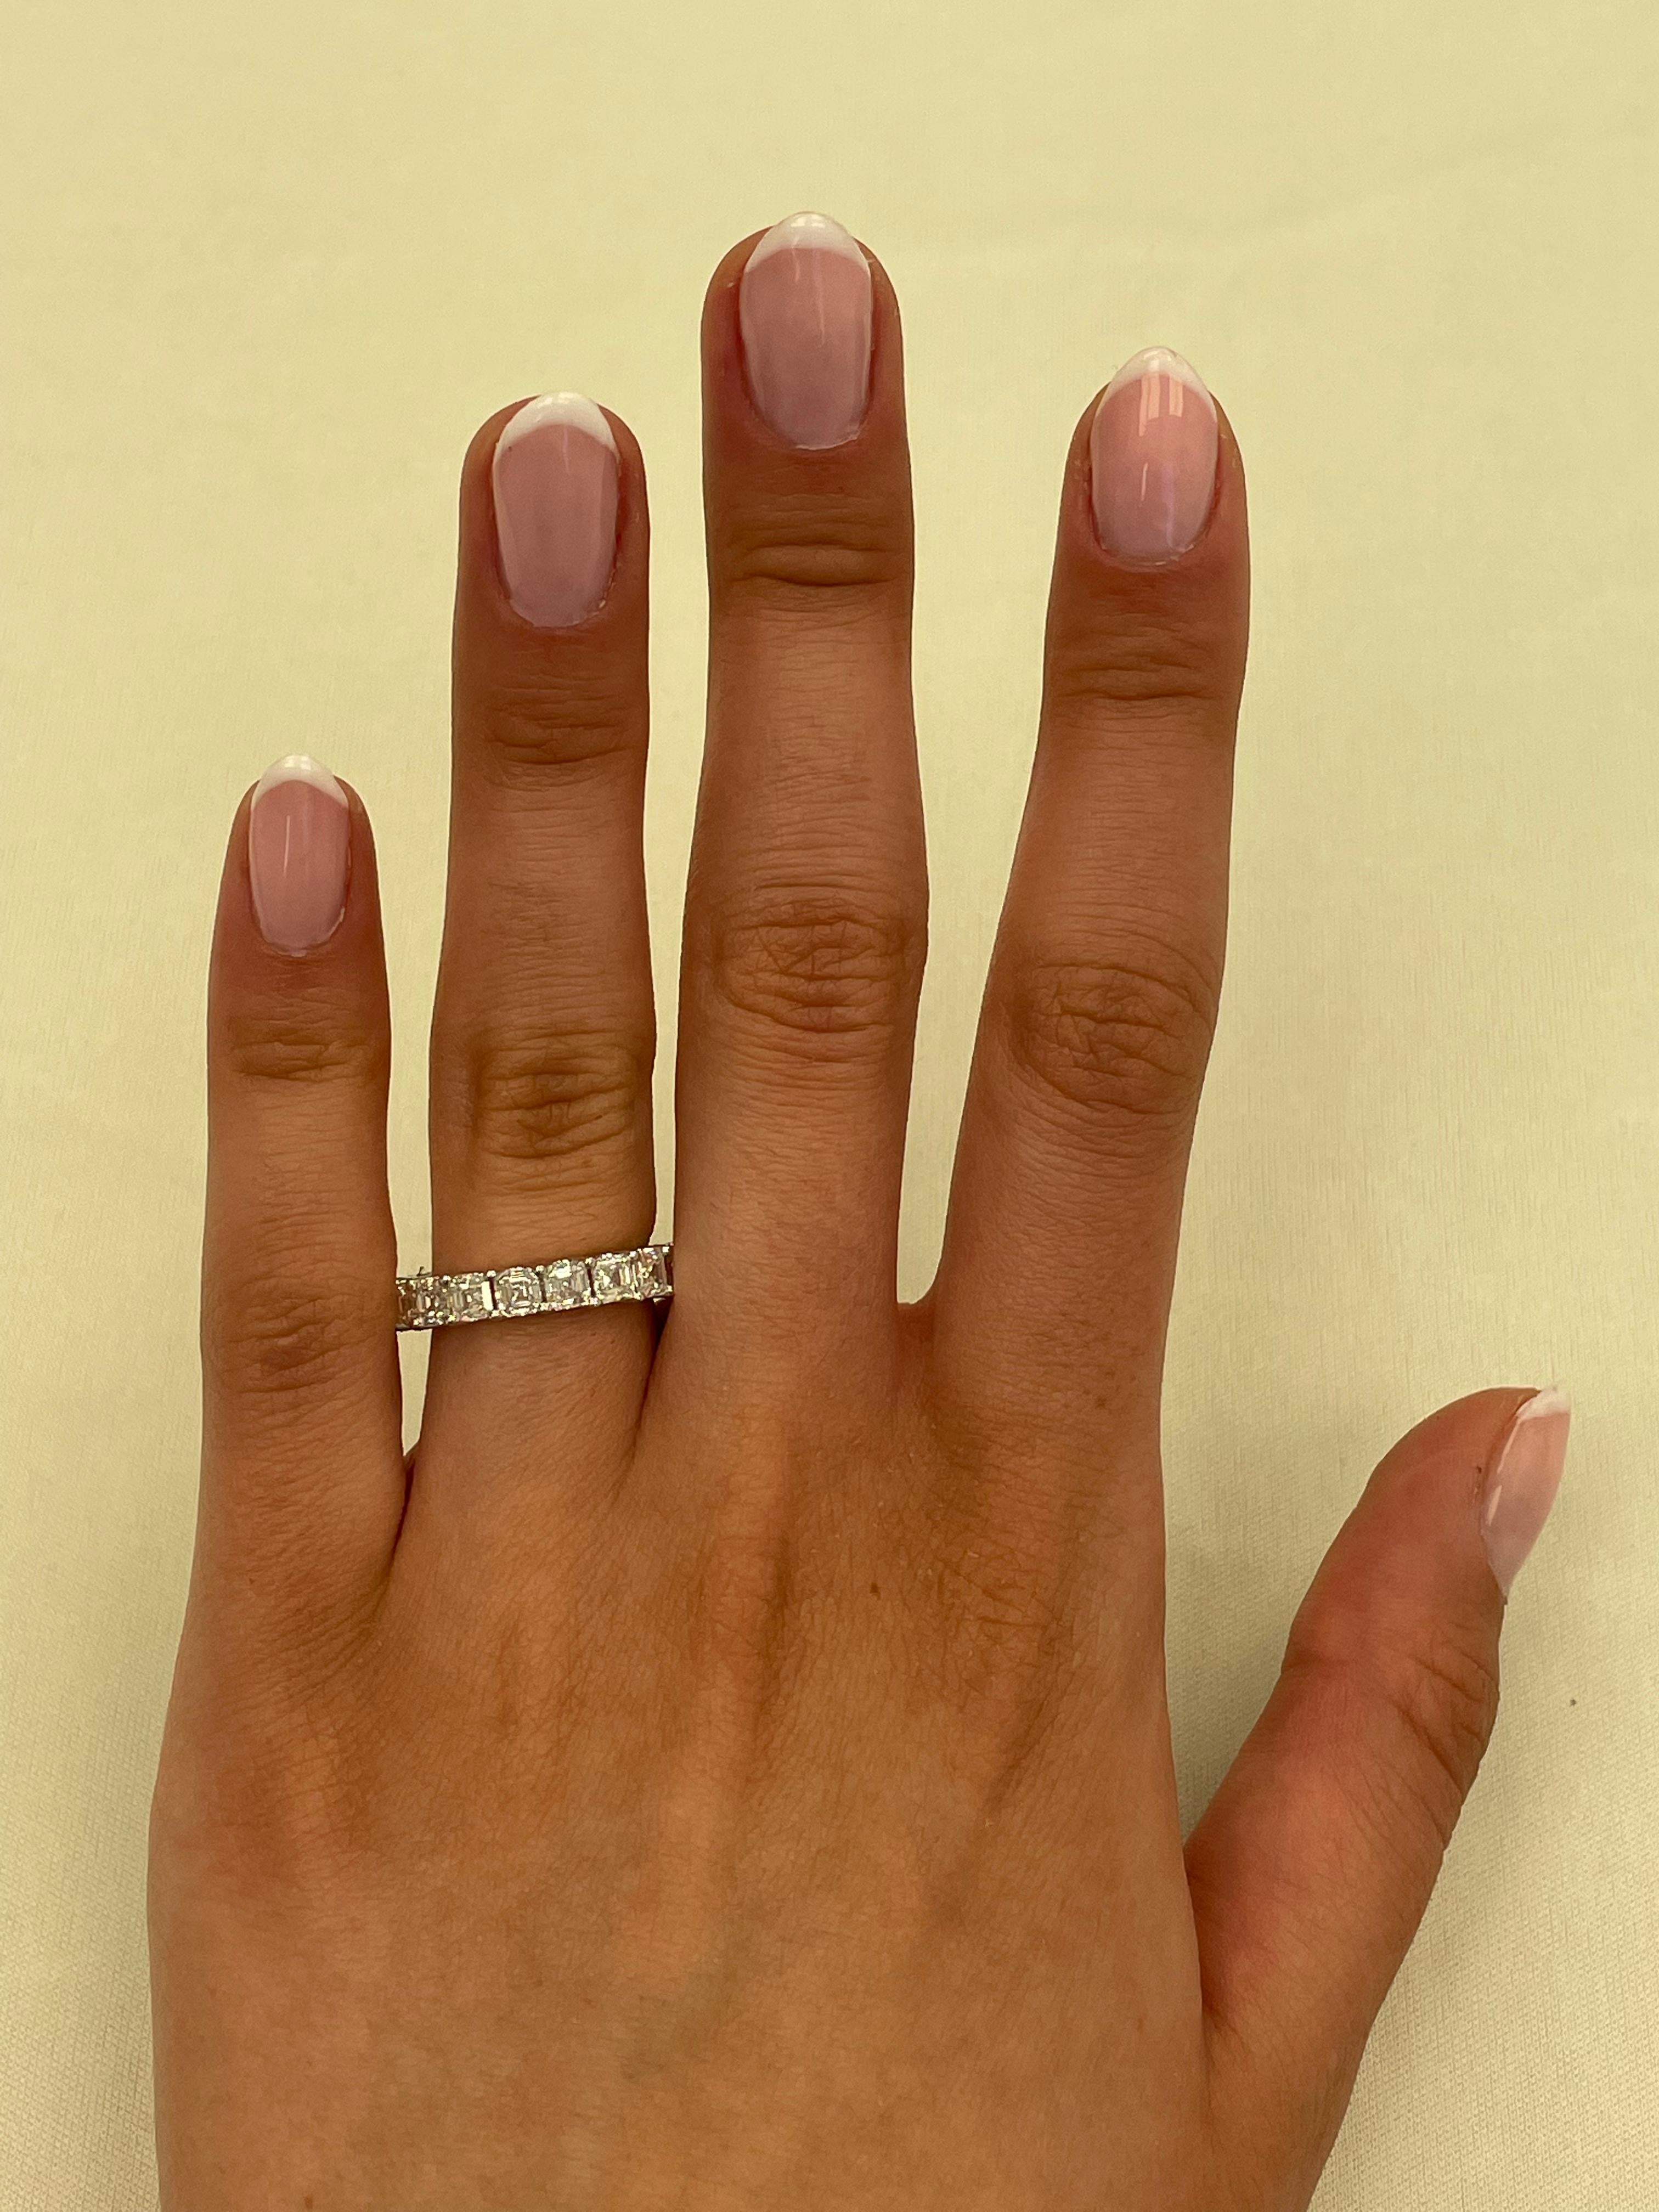 Stunning asscher cut diamond eternity band, By Alexander Beverly Hills.
19 asscher cut diamonds, 3.79 carats. D/E color and VVS clarity. 18-karat white gold, 3.53 grams, size 5.25. 
Accommodated with an up to date appraisal by a GIA G.G. upon